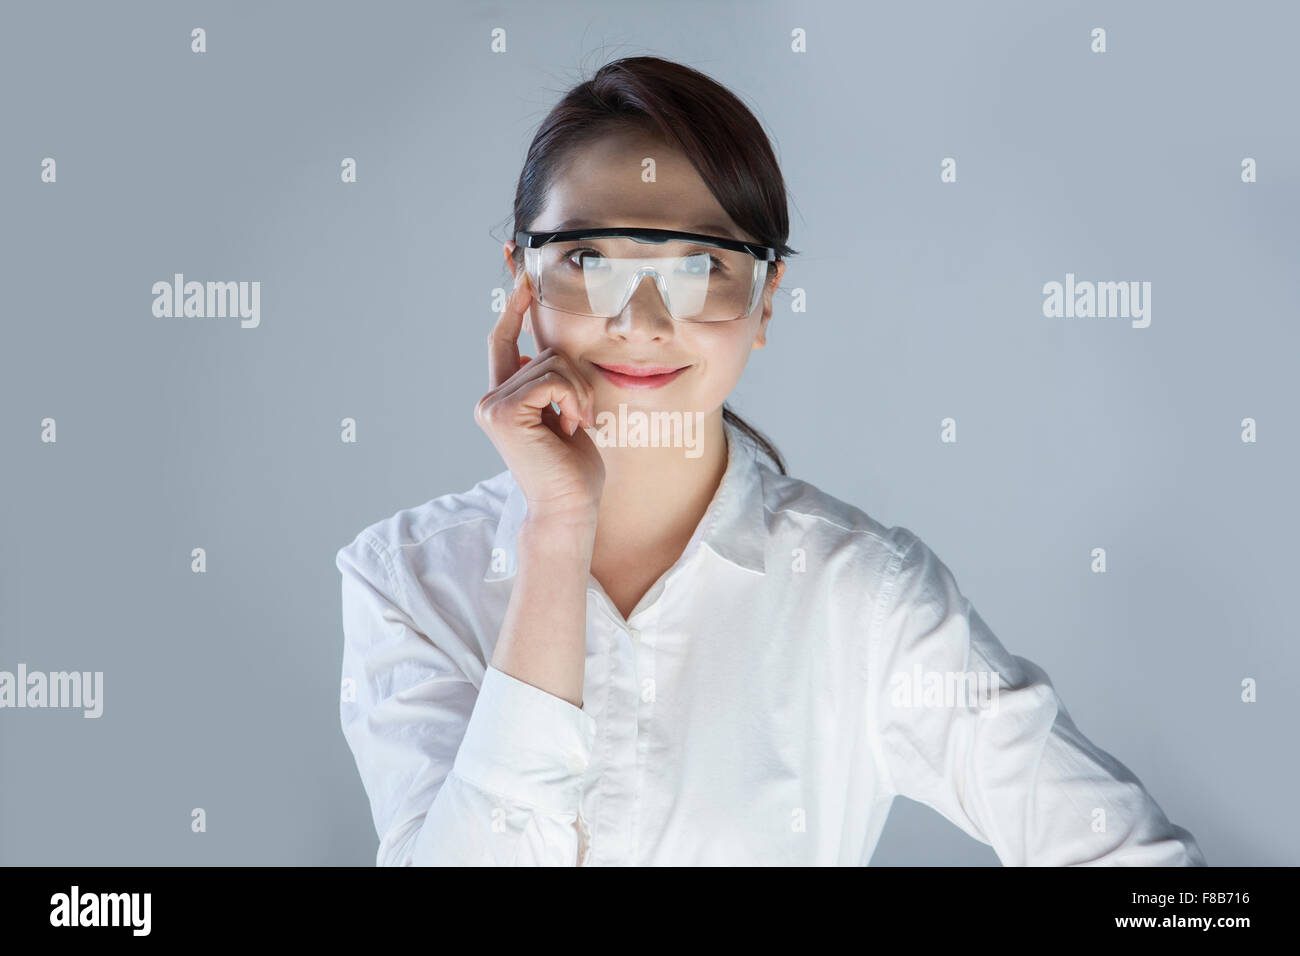 Business woman wearing goggles and staring forward Stock Photo